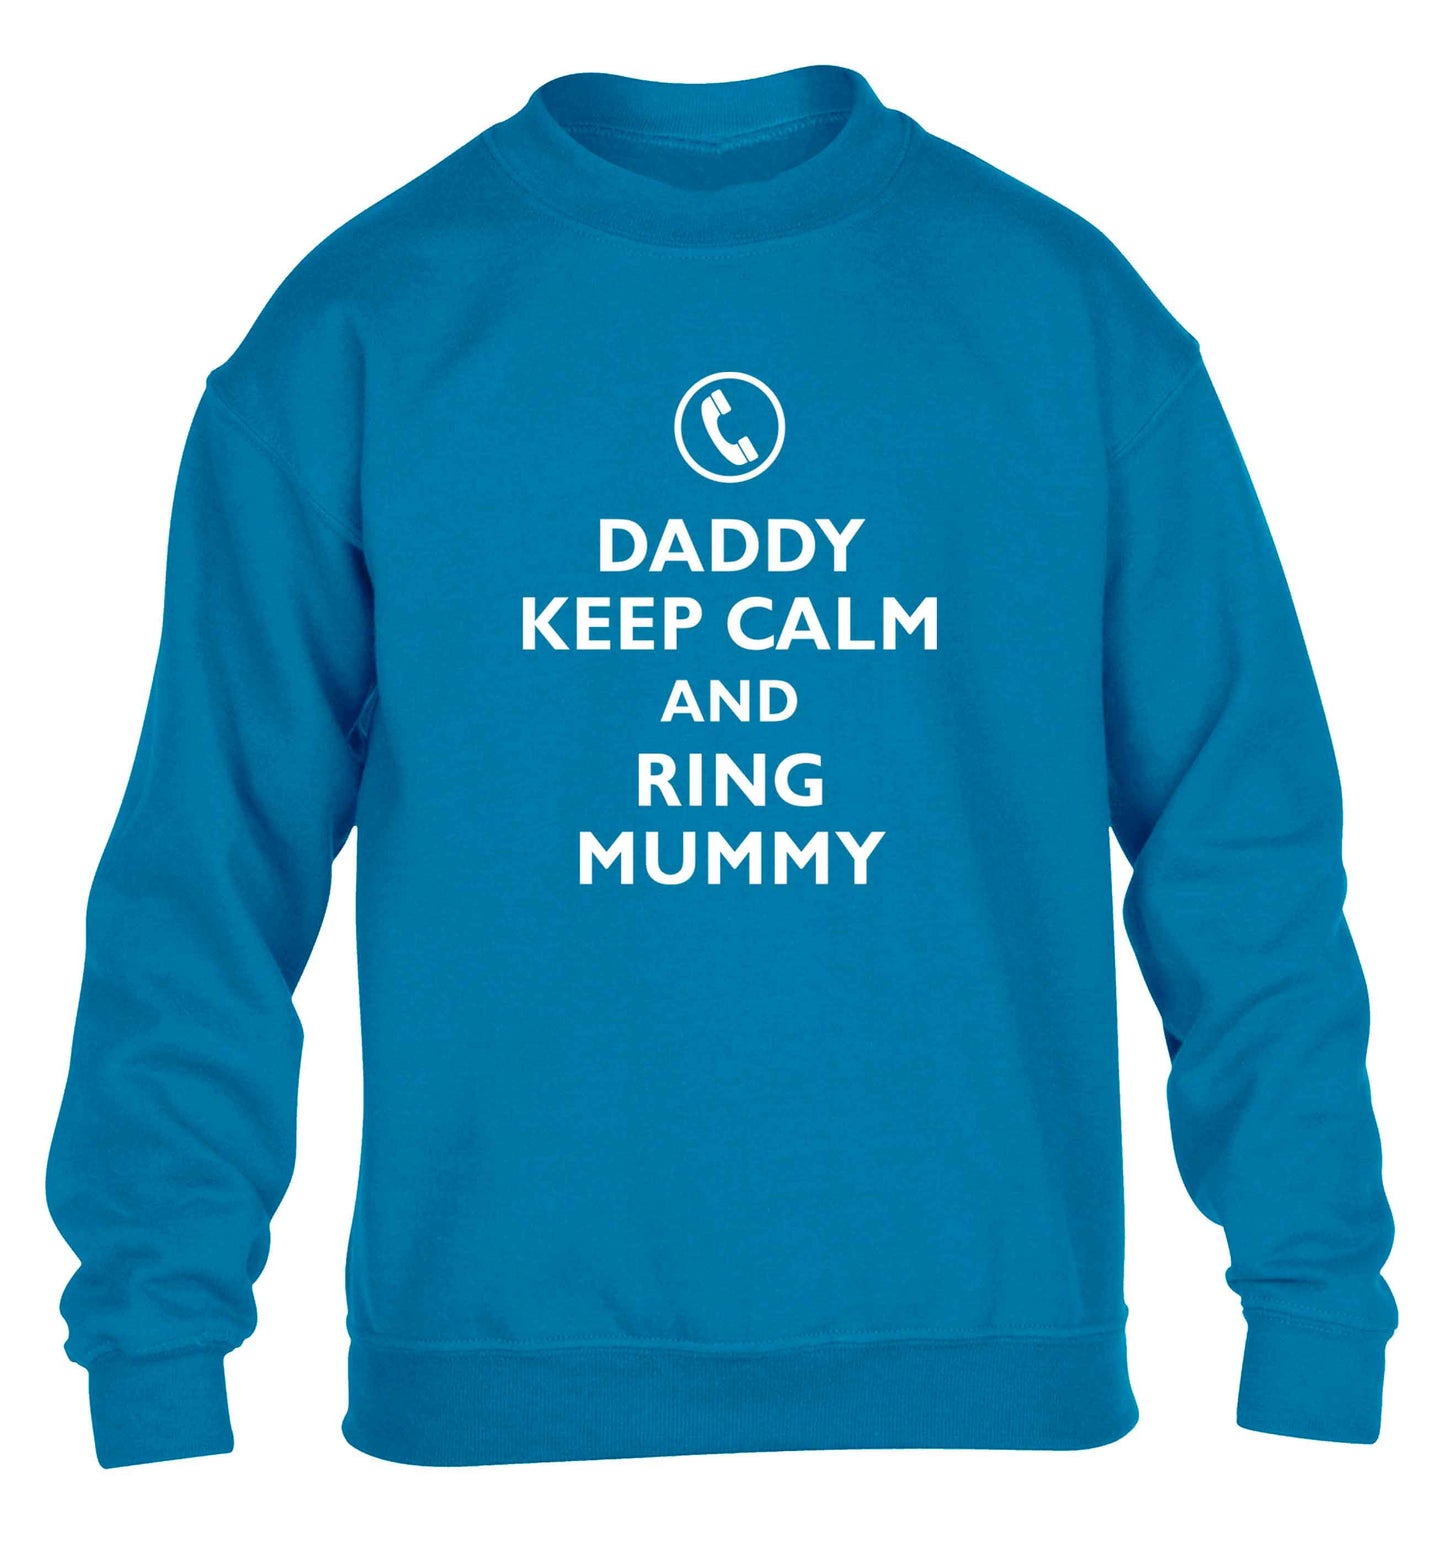 Daddy keep calm and ring mummy children's blue sweater 12-13 Years